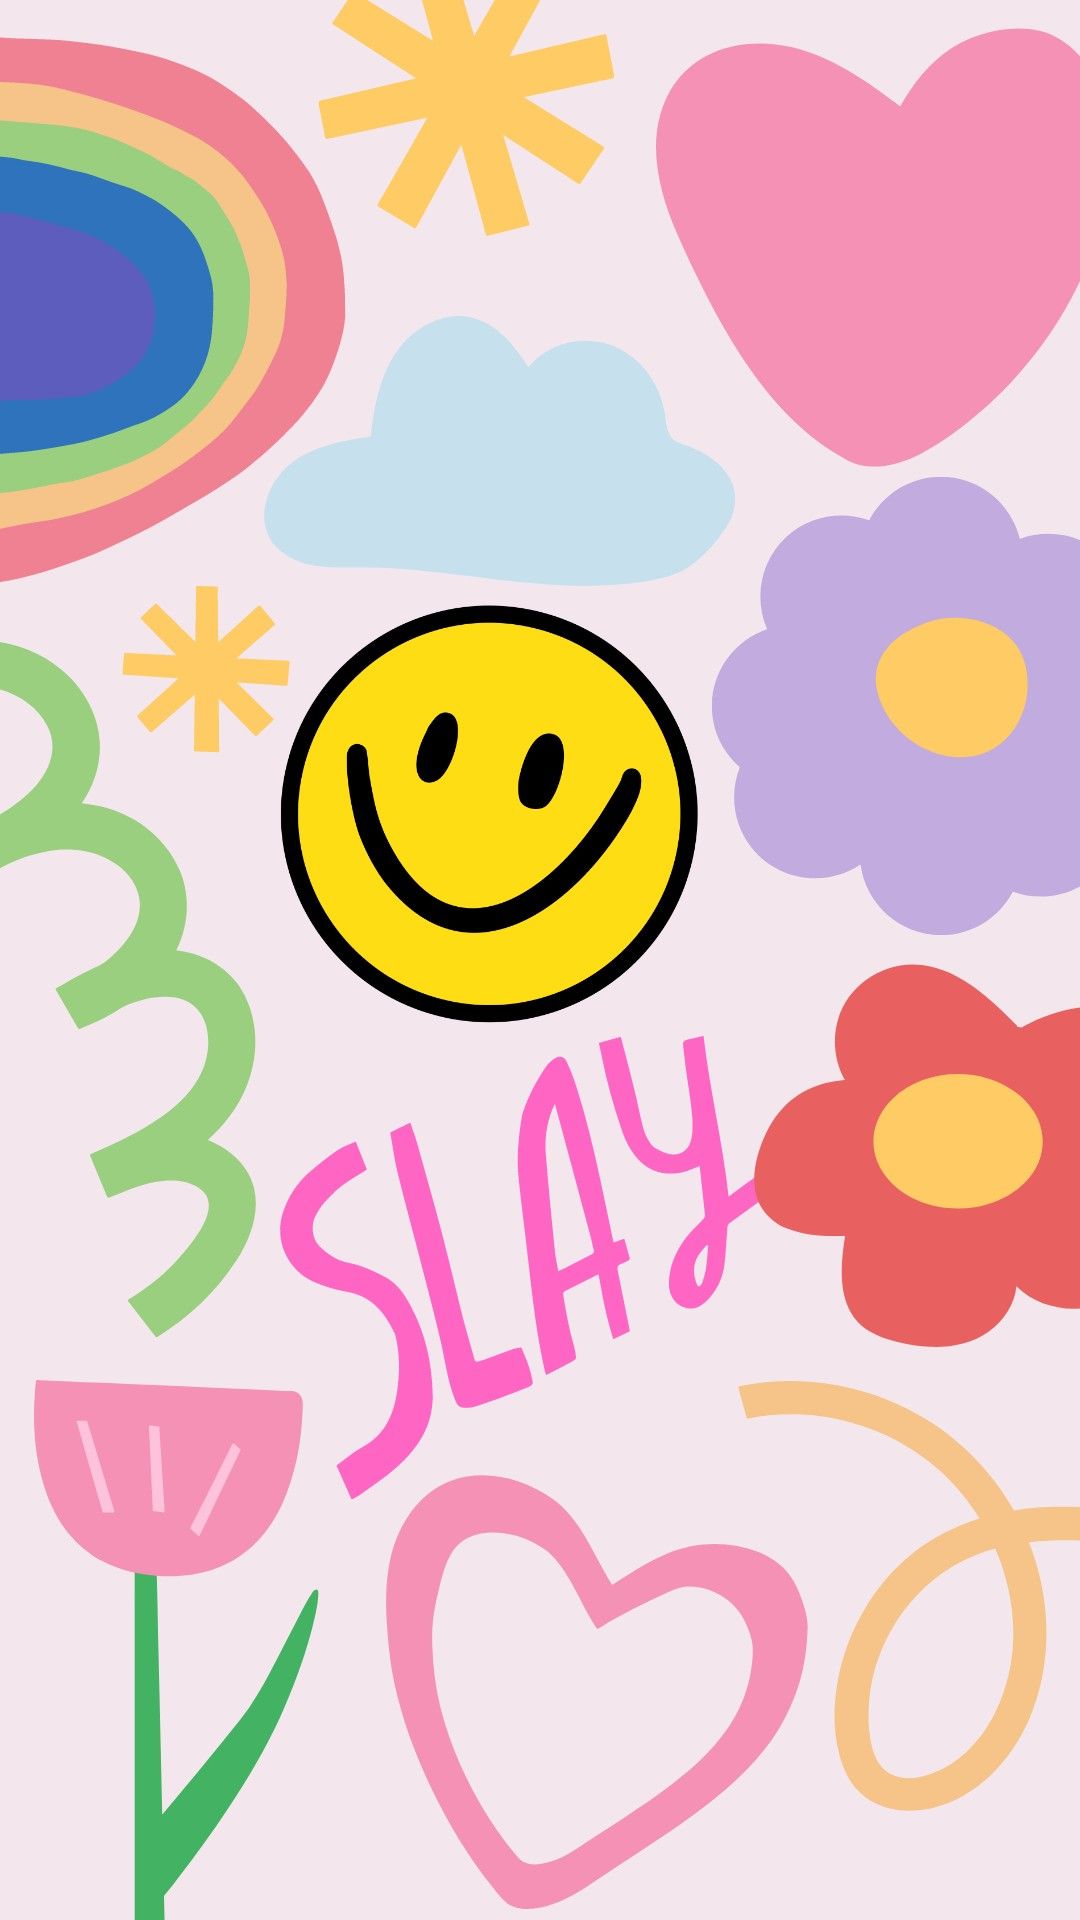 Slay the say! Really Cute Preppy Aesthetic Wallpaper For Your Phone!